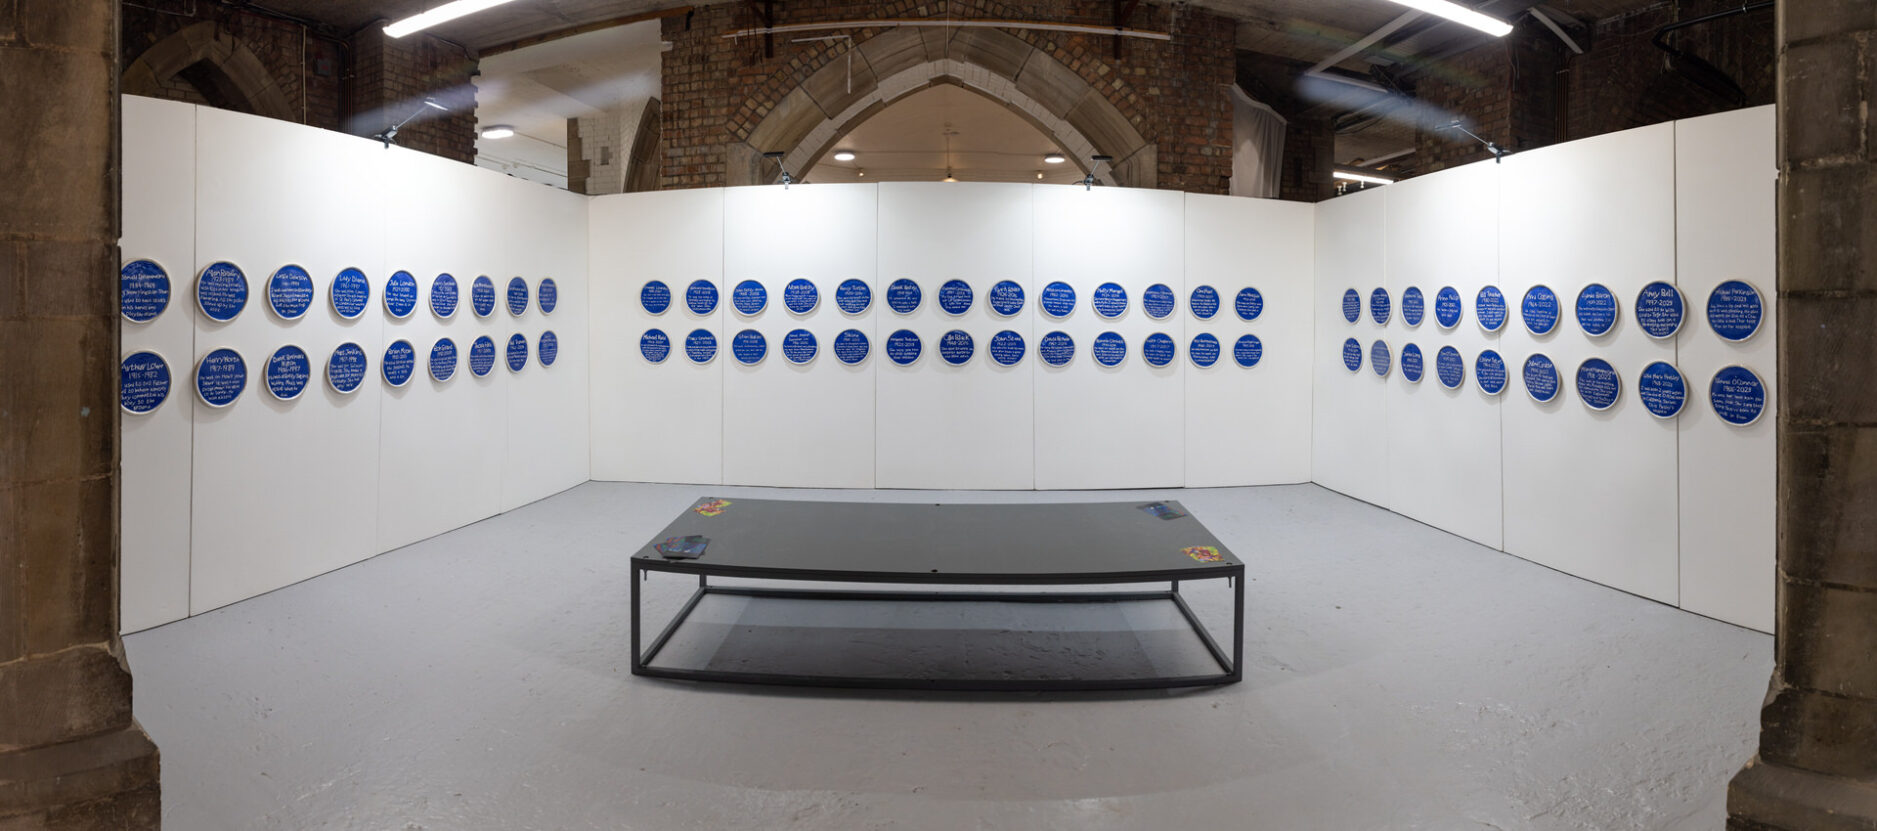 60 of Horace Lindezey's ceramic blue plaques displayed on white gallery walls.